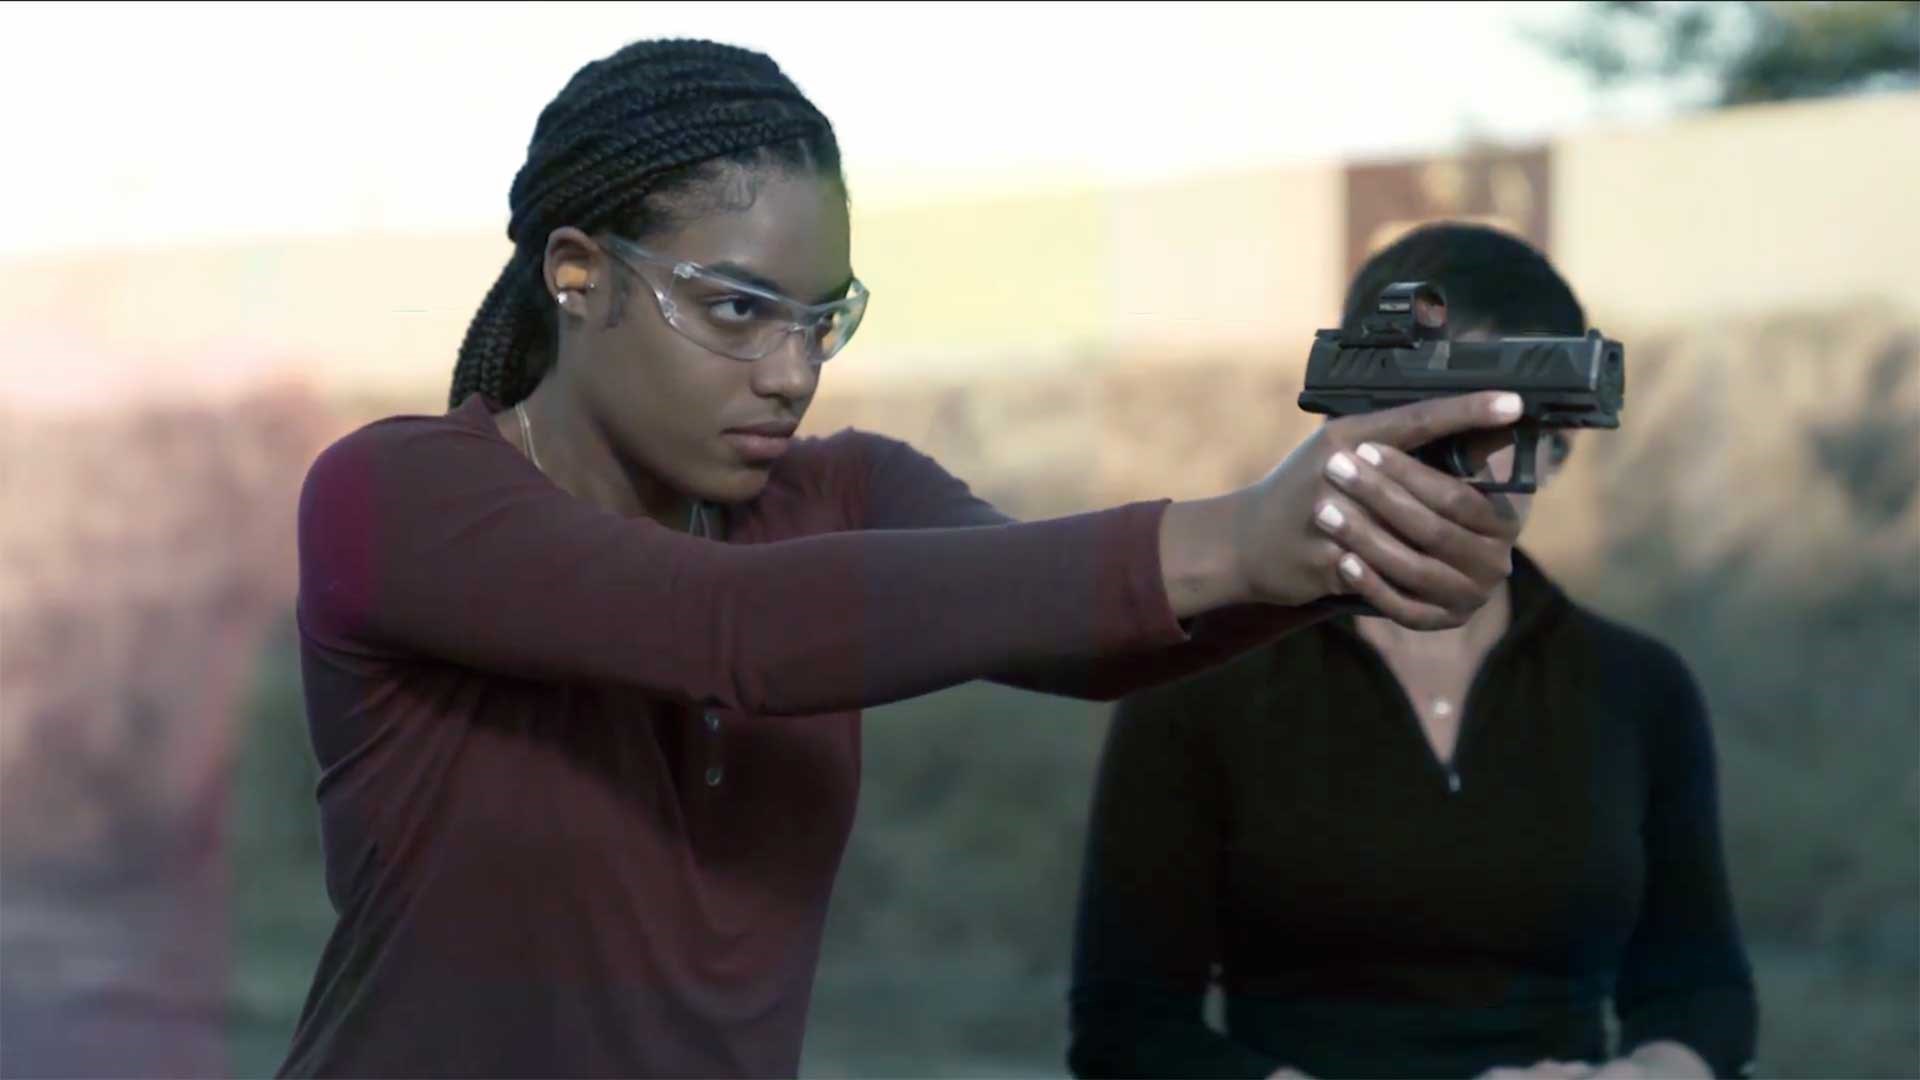 A woman aims a Walther handgun downrange while an instructor watches in the background.